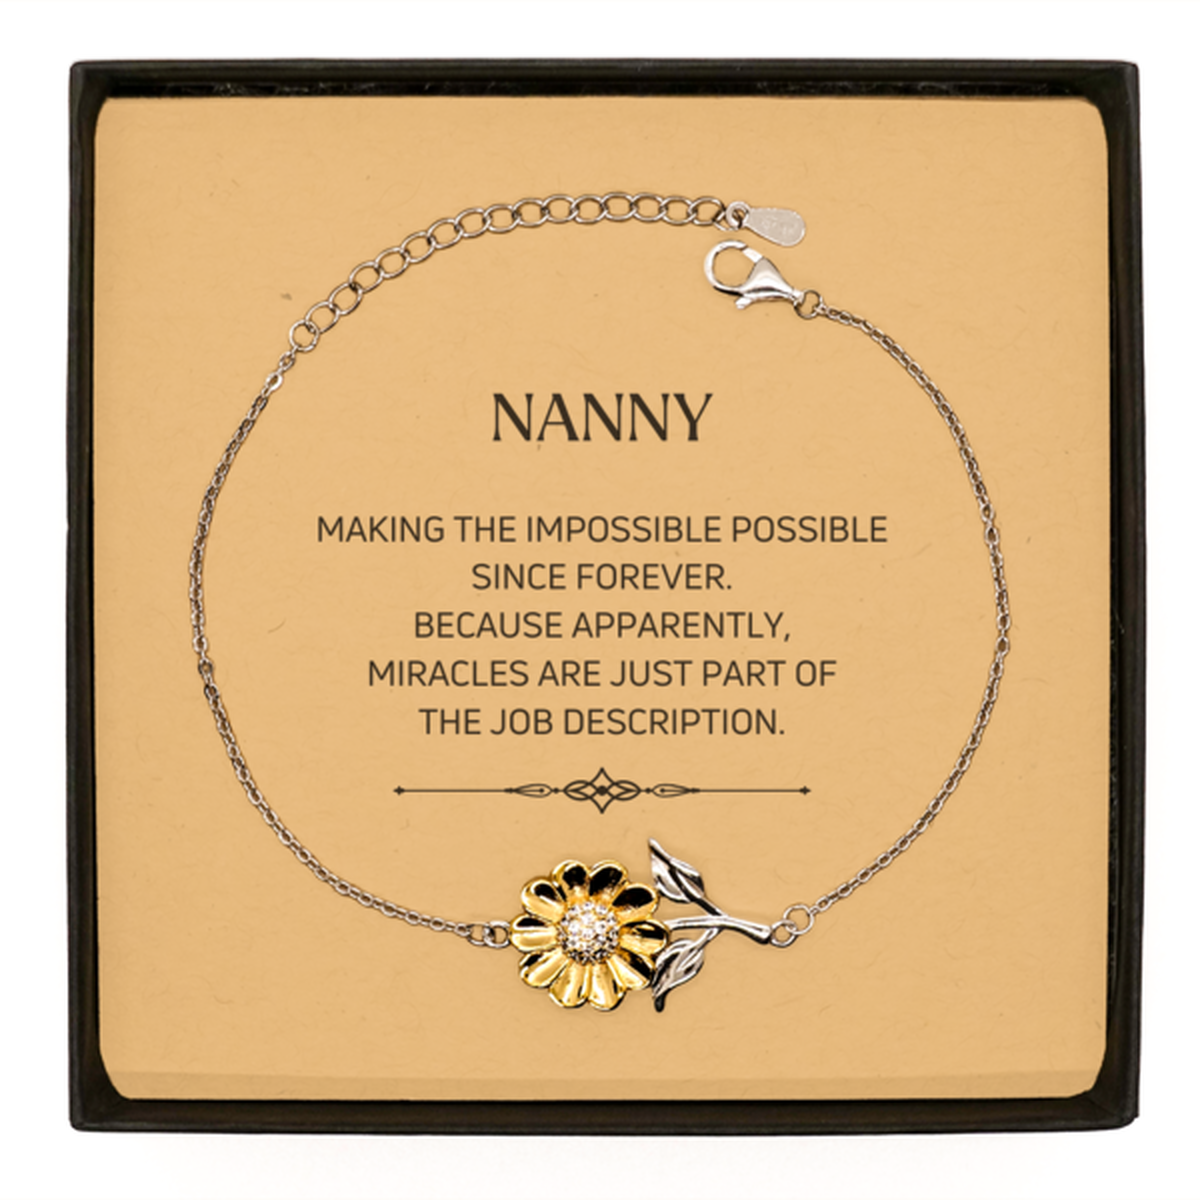 Funny Nanny Gifts, Miracles are just part of the job description, Inspirational Birthday Sunflower Bracelet For Nanny, Men, Women, Coworkers, Friends, Boss